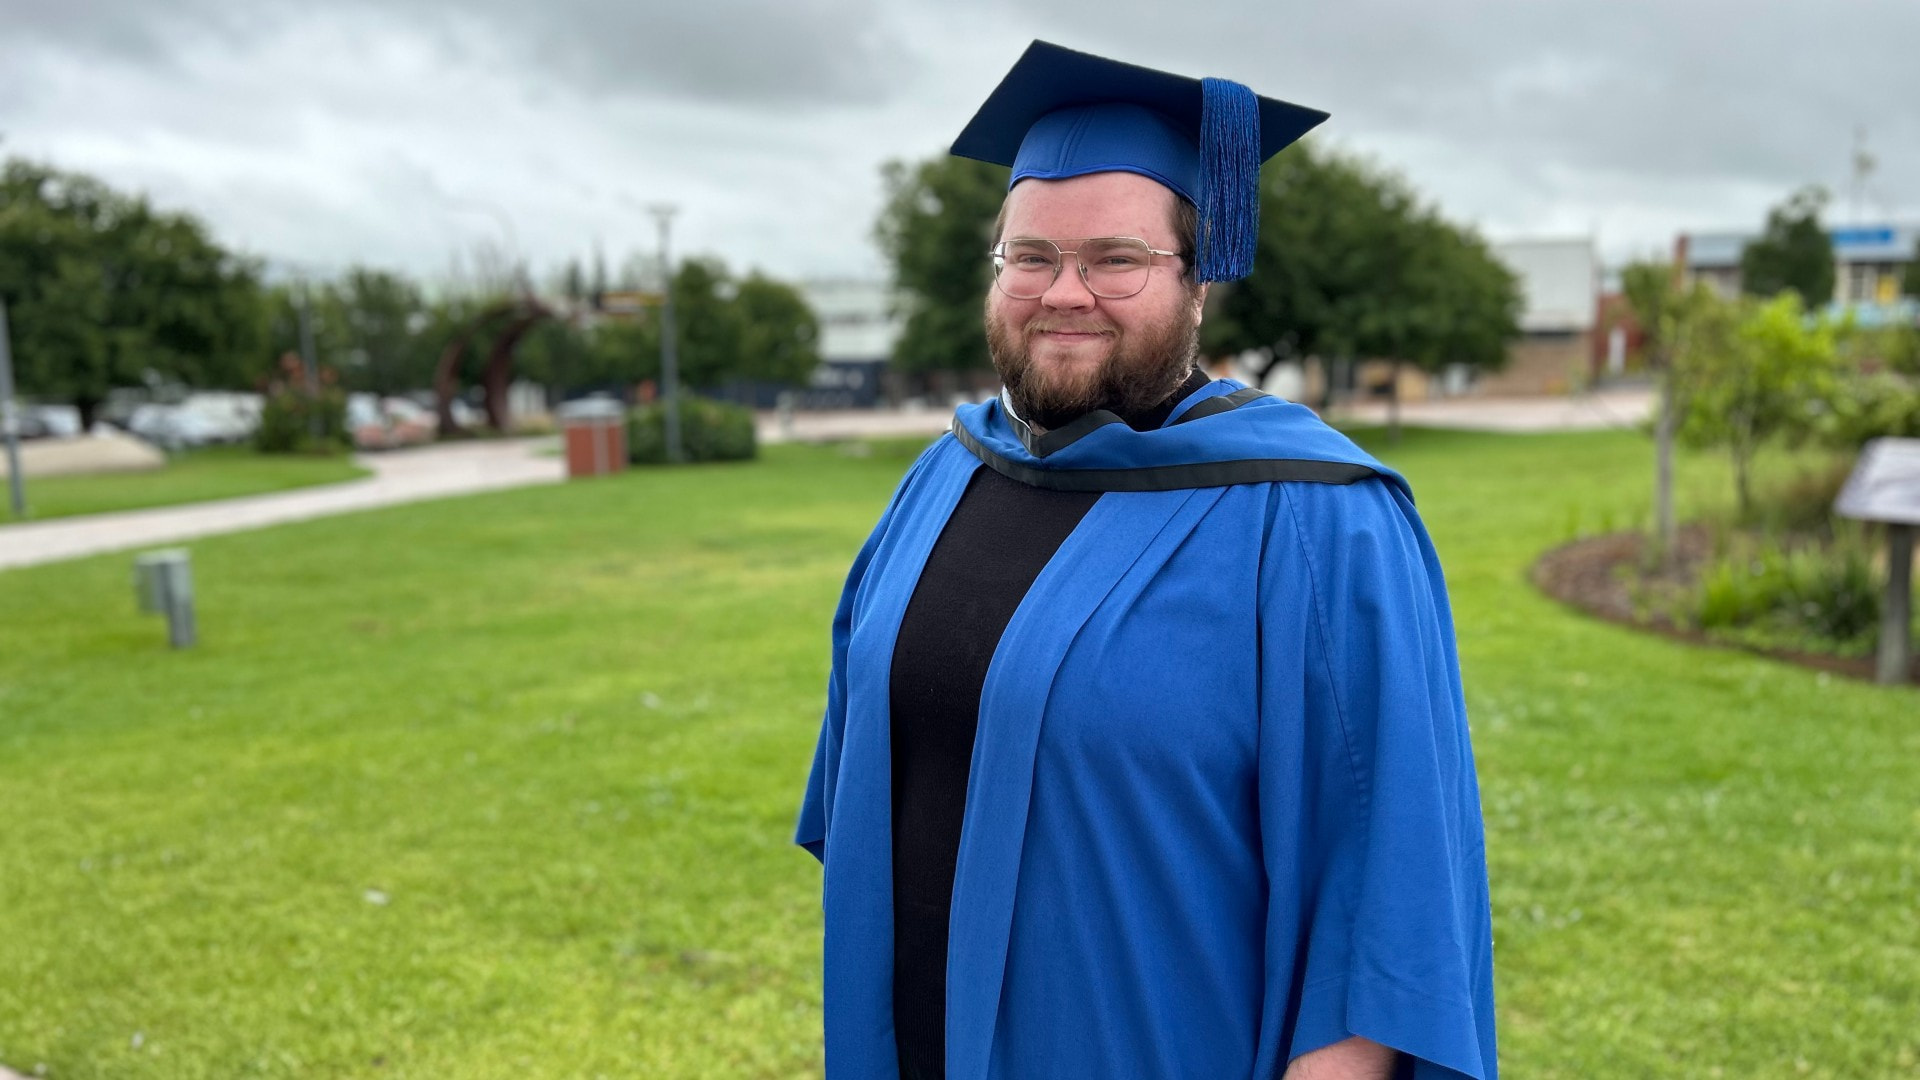 UOW Graduate Adrian Pittman stands in a blue graduation gown and cap. He wears glasses and smiles at the camera.